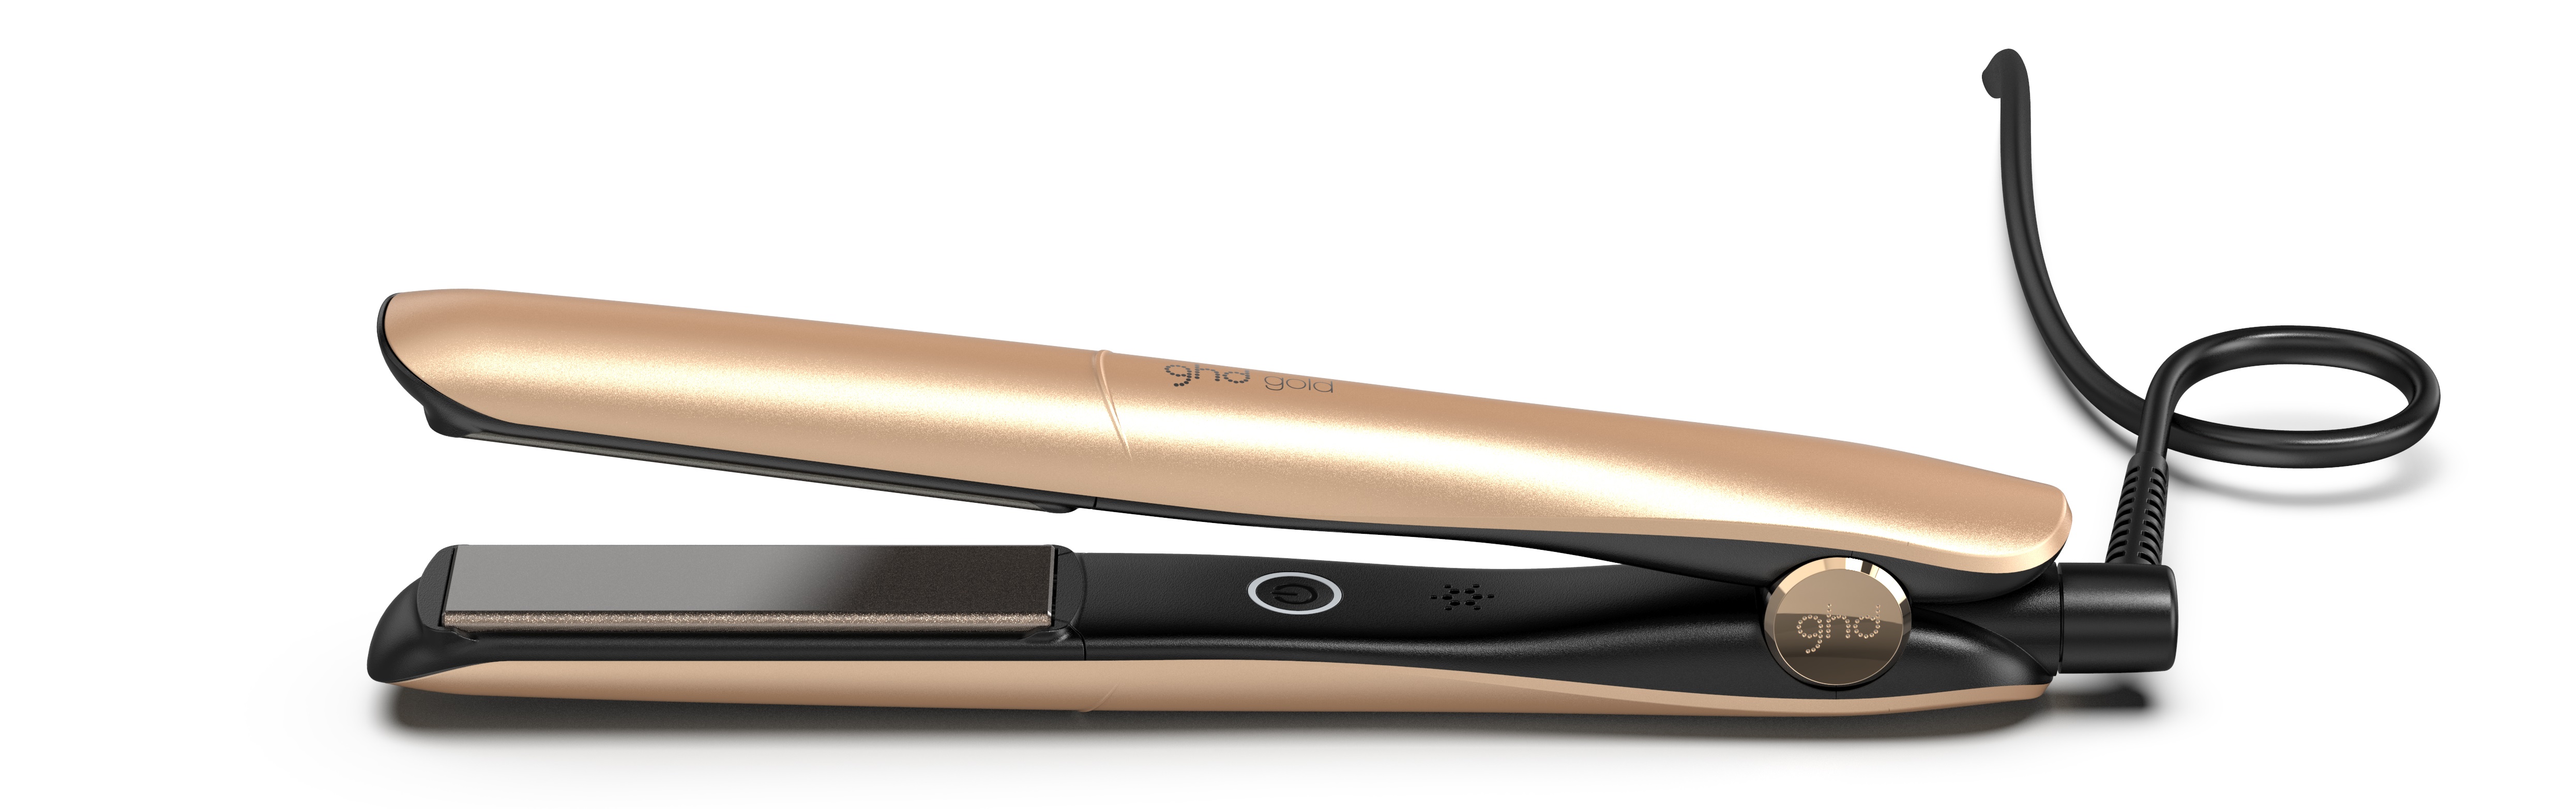 The limited edition ghd saharan earth gold styler.